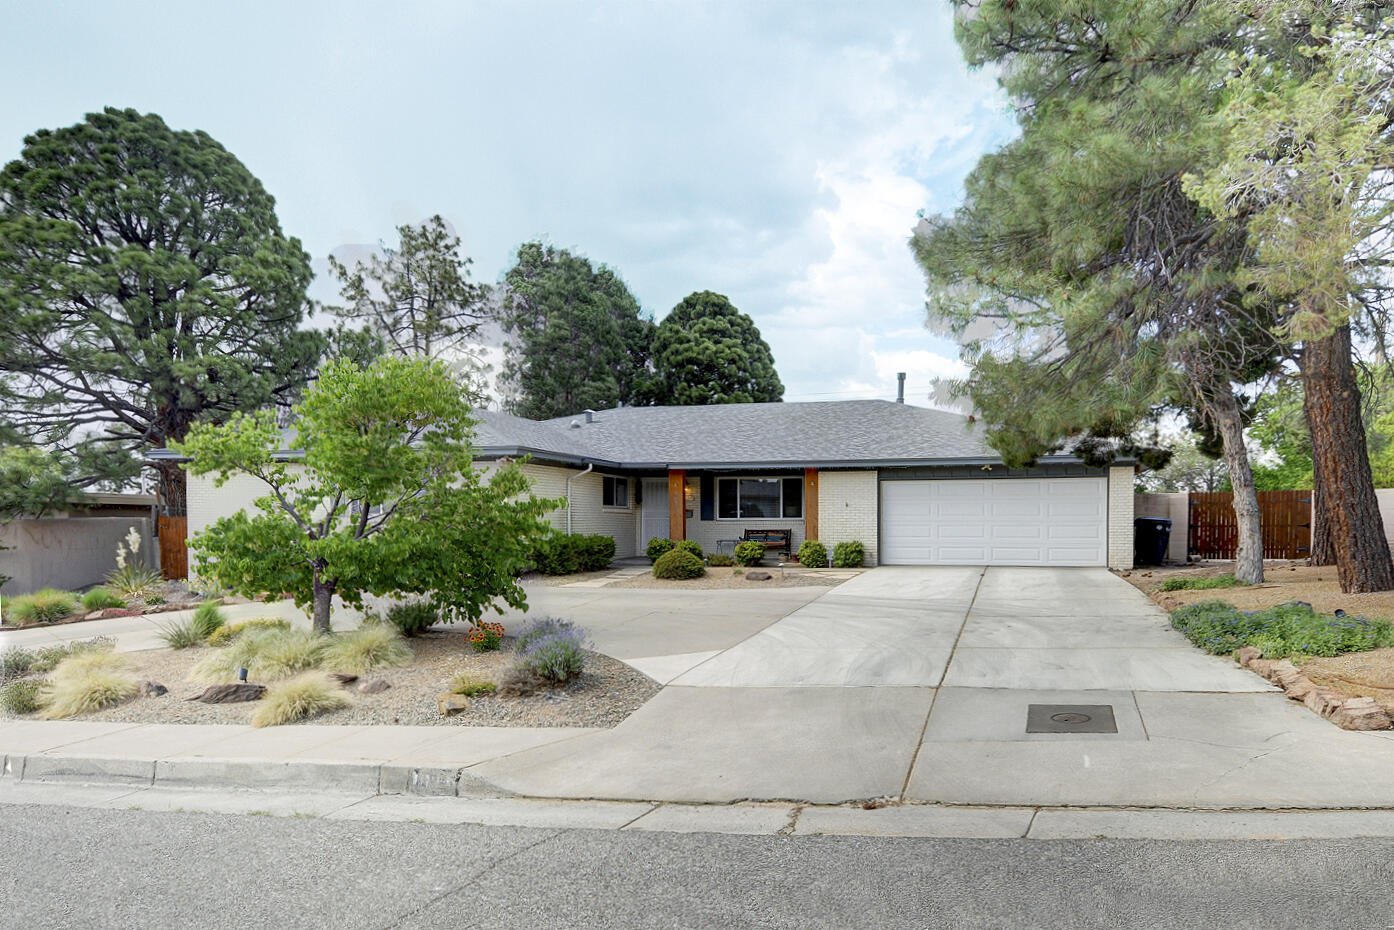 Lovely Spacious light-filled Mossman home with numerous upgrades. Located near the UNM North Golf Course and the UNM Law and Medical school. Flowing floor plan is perfect for entertaining. Beautiful refinished hardwood floors in LR, DR, and 4 bedrooms. Complete eat-in  kitchen remodel in 2020 with granite counter tops, refaced cabinets, 2 pantries + upscale ss appliances.  Dramatic skylight in the kitchen. Large 19'x 20' family room with fireplace, built-ins, plus French doors to back patio,. Huge master bedroom suite w/ 3 closets including 1 walk-in. Updated baths. New roof 2018 w/10 year warranty. Newer central A/C unit. New water heater 2021. 200 amp elec panel. .28 acre lot. Gracious front porch. Xeriscaped front yard. Shady newer ramada in the landscaped backyard. High privacy wall